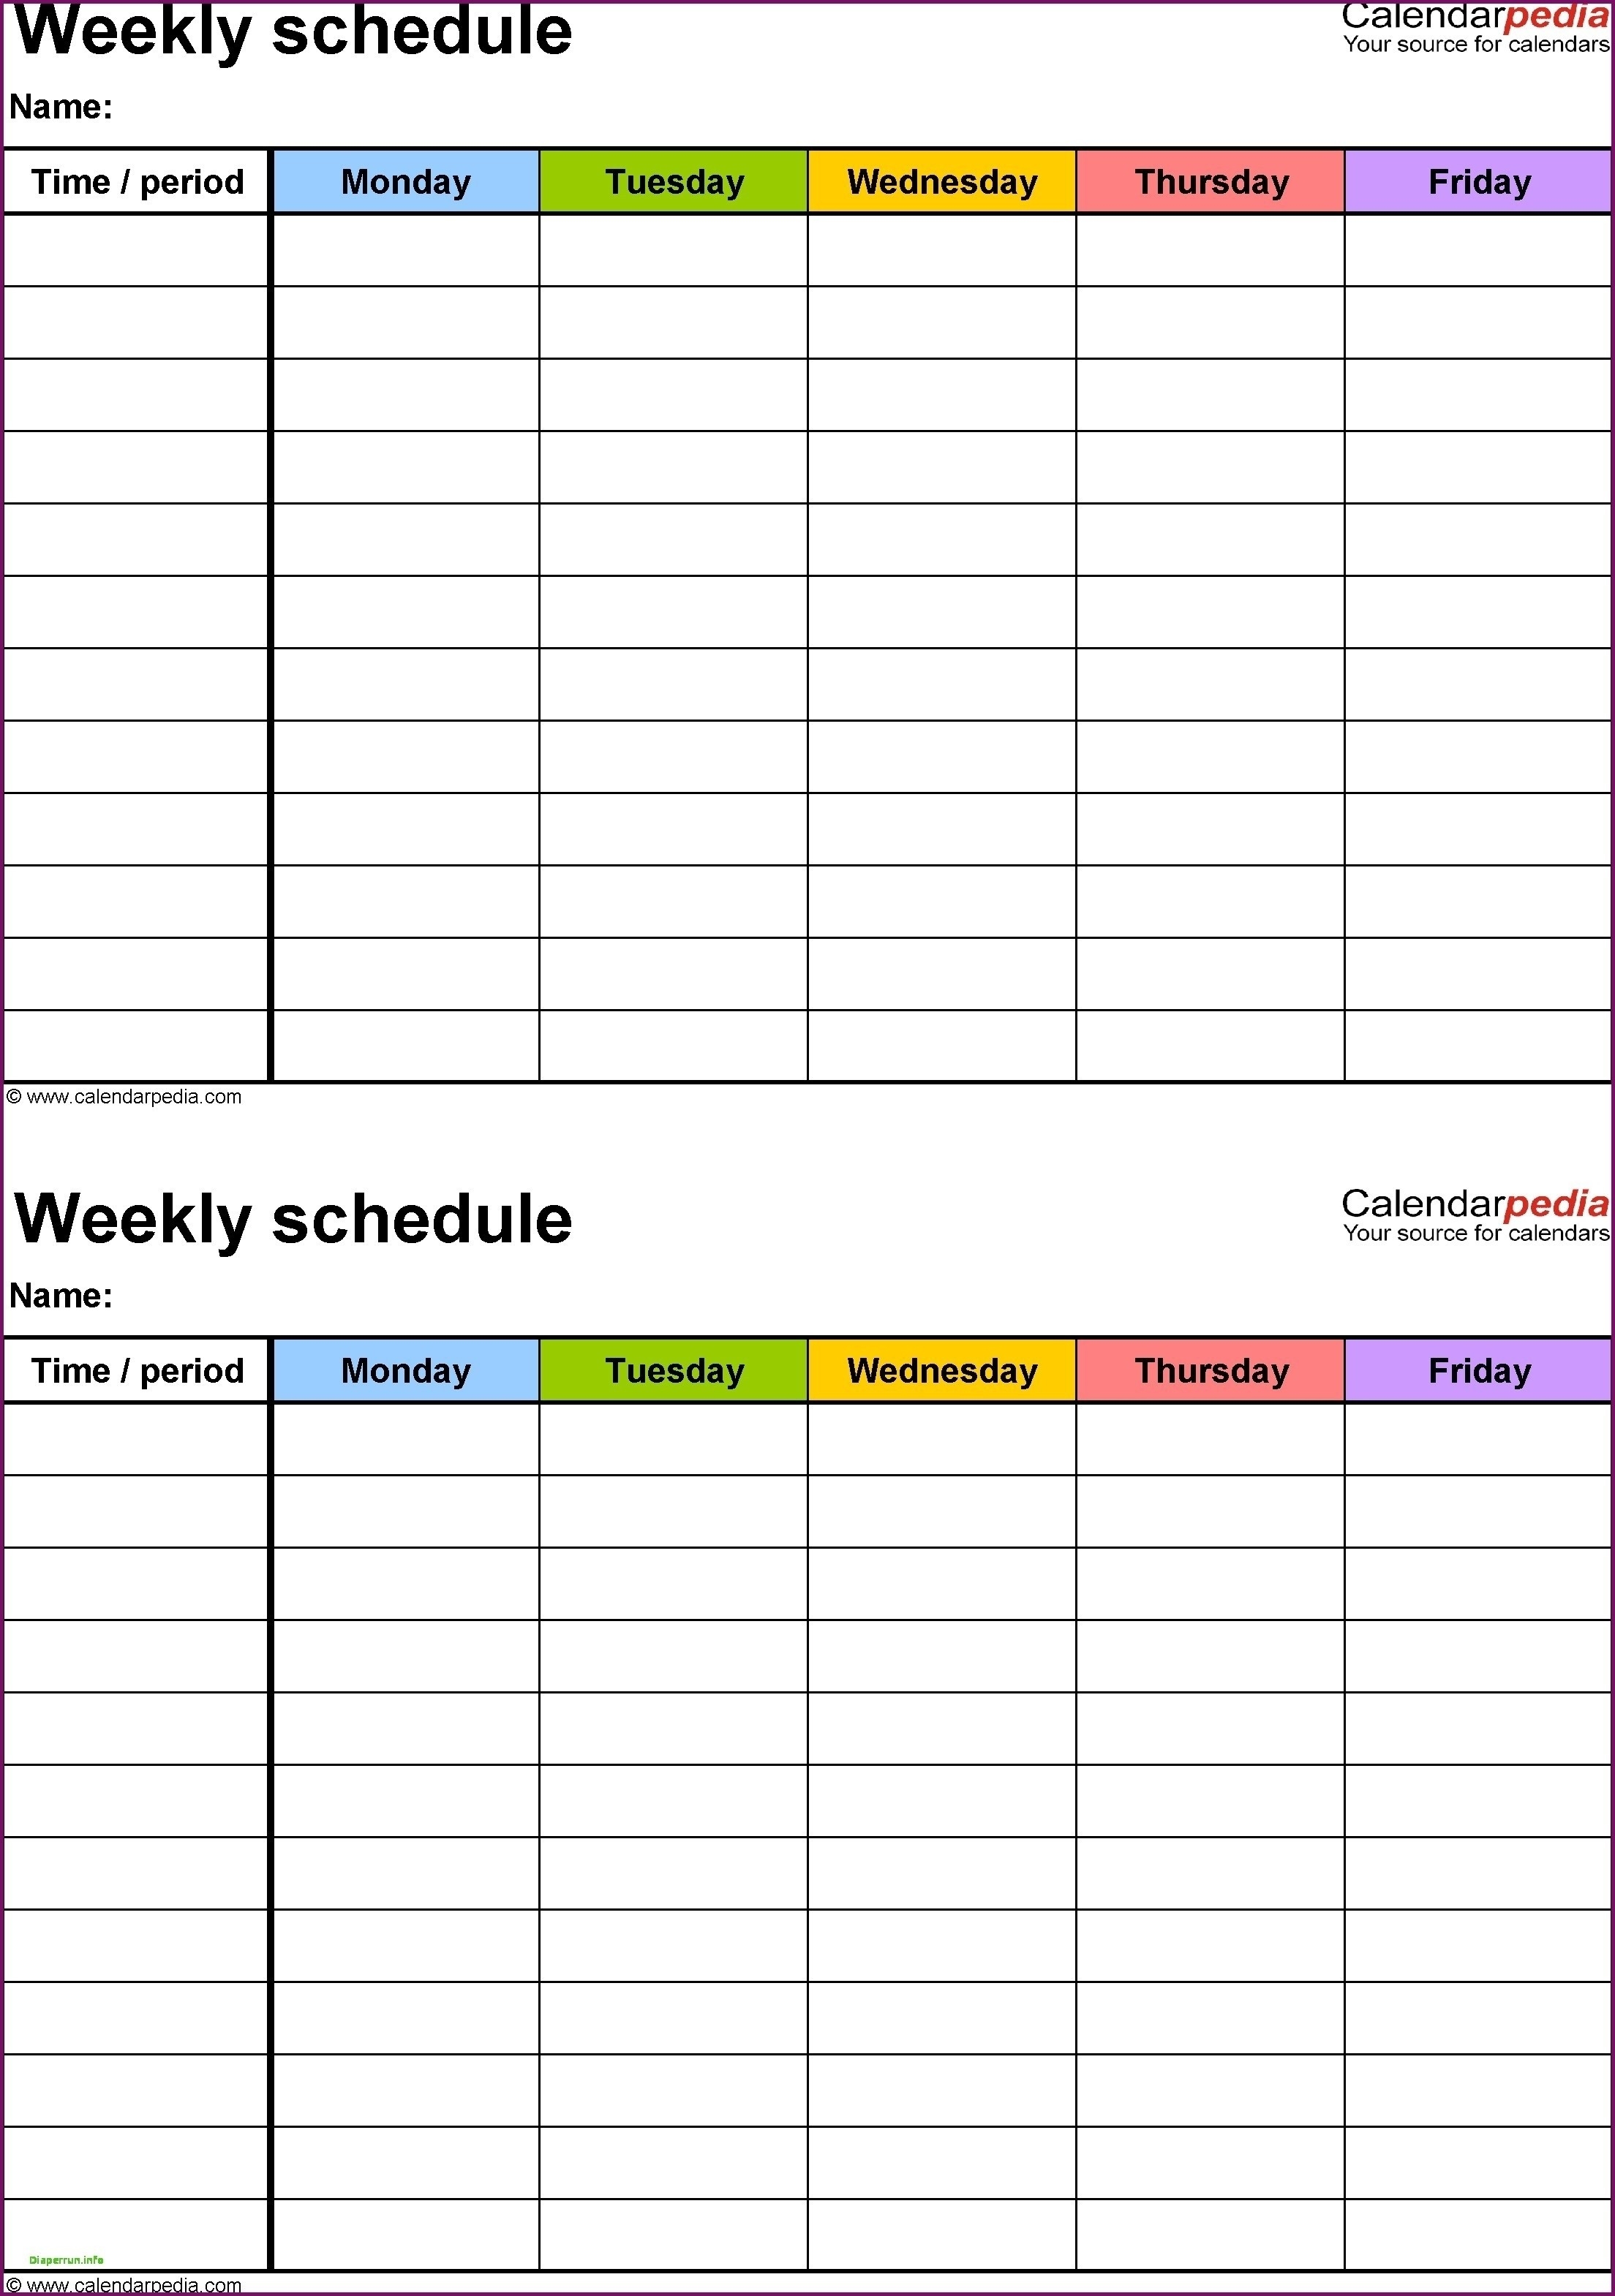 12 Hour Shift Schedule Template | Calendar Printing Example-12 Hour Schedule Templates